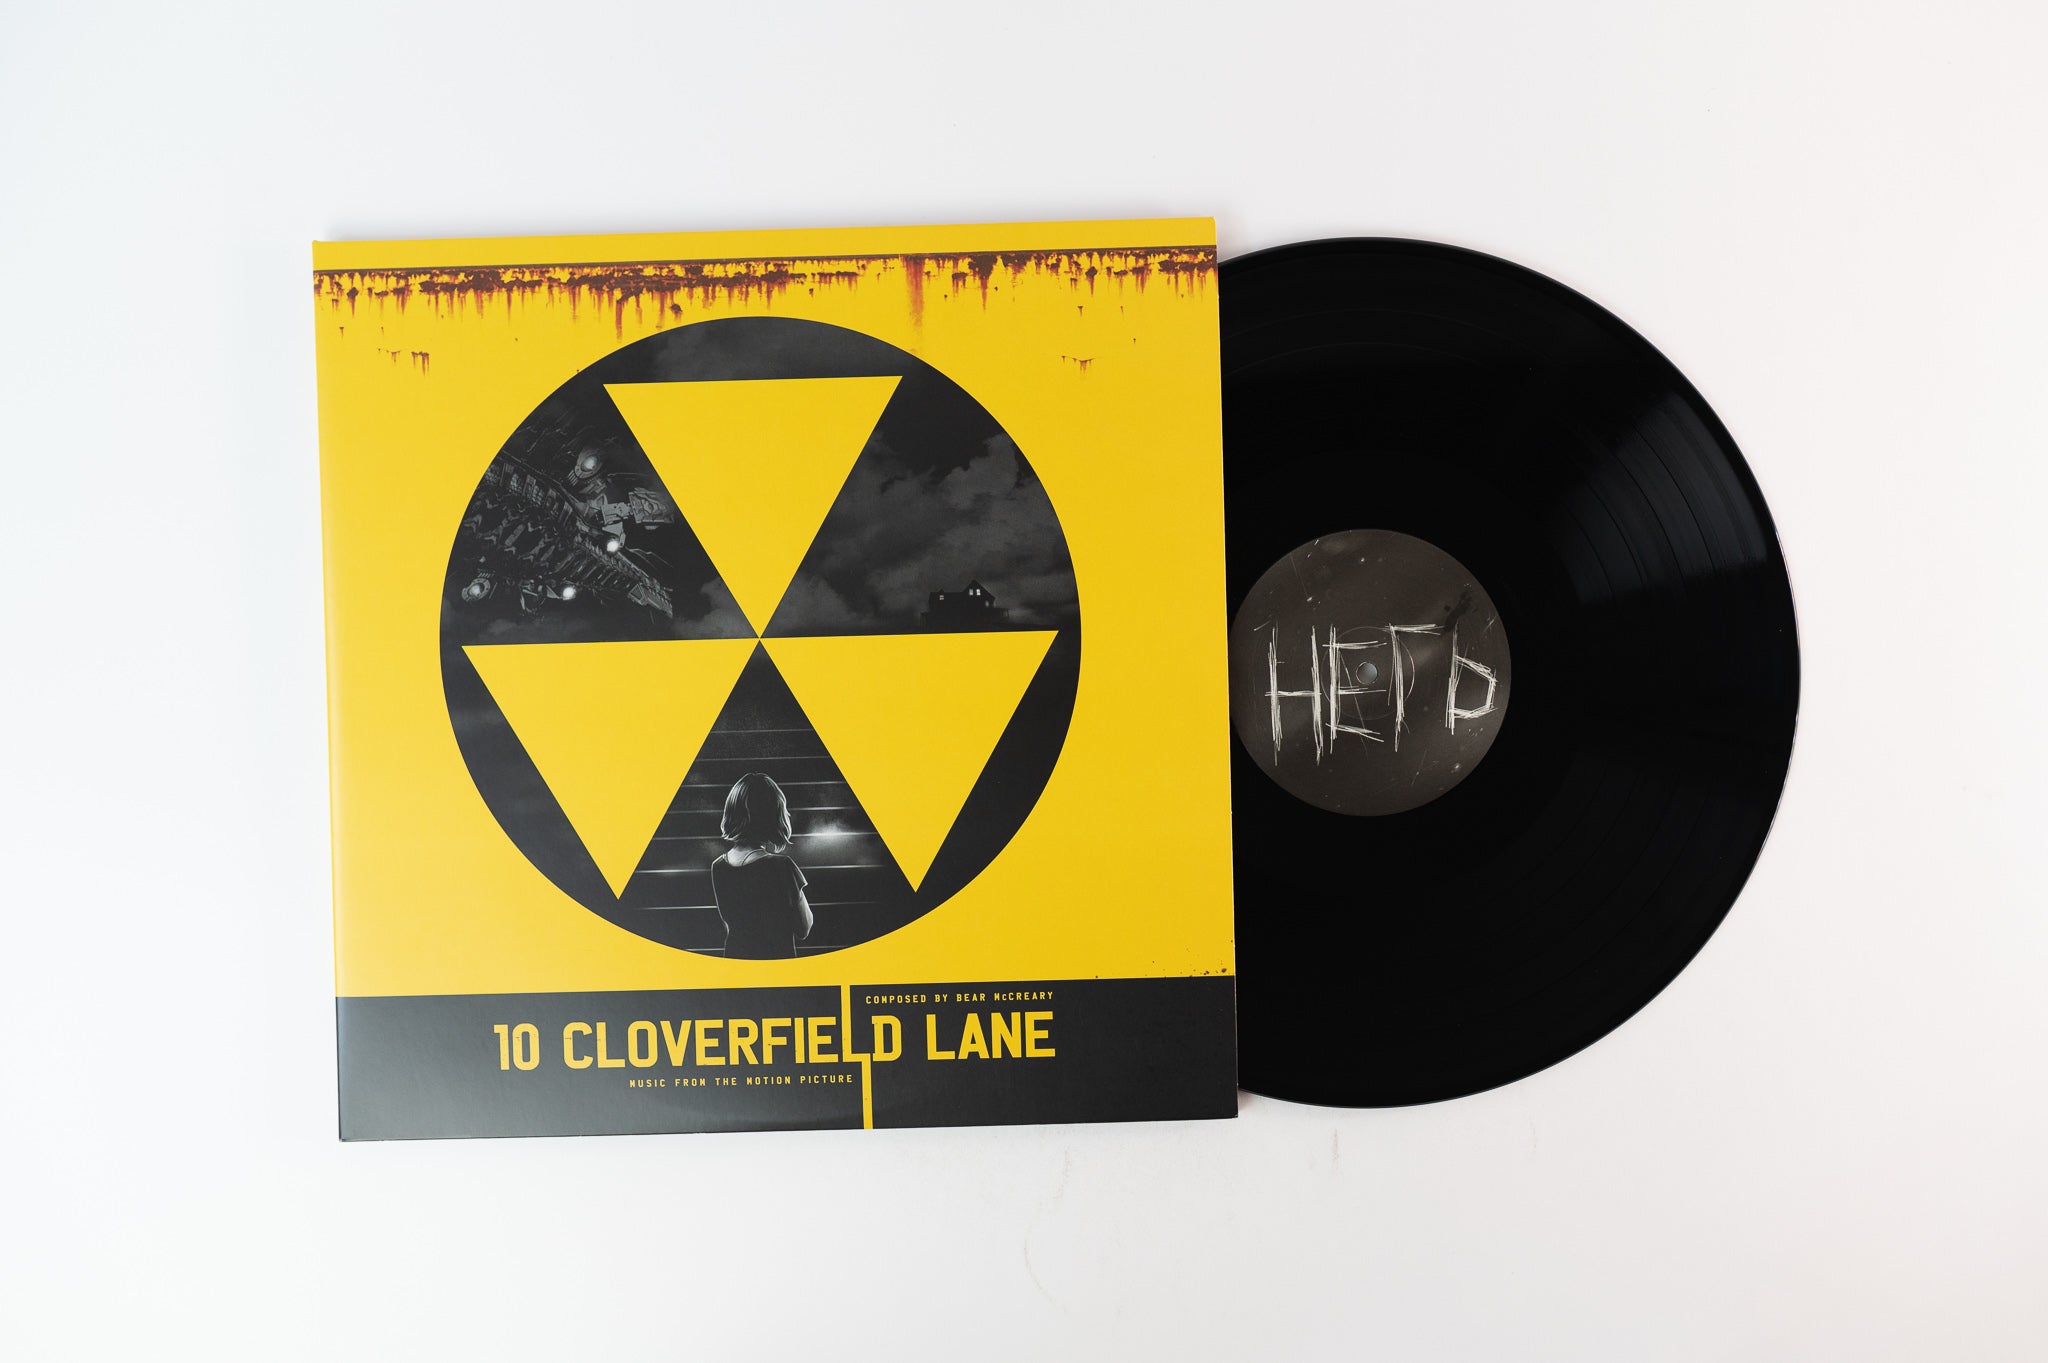 Bear McCreary - 10 Cloverfield Lane (Music From The Motion Picture) on Mondo